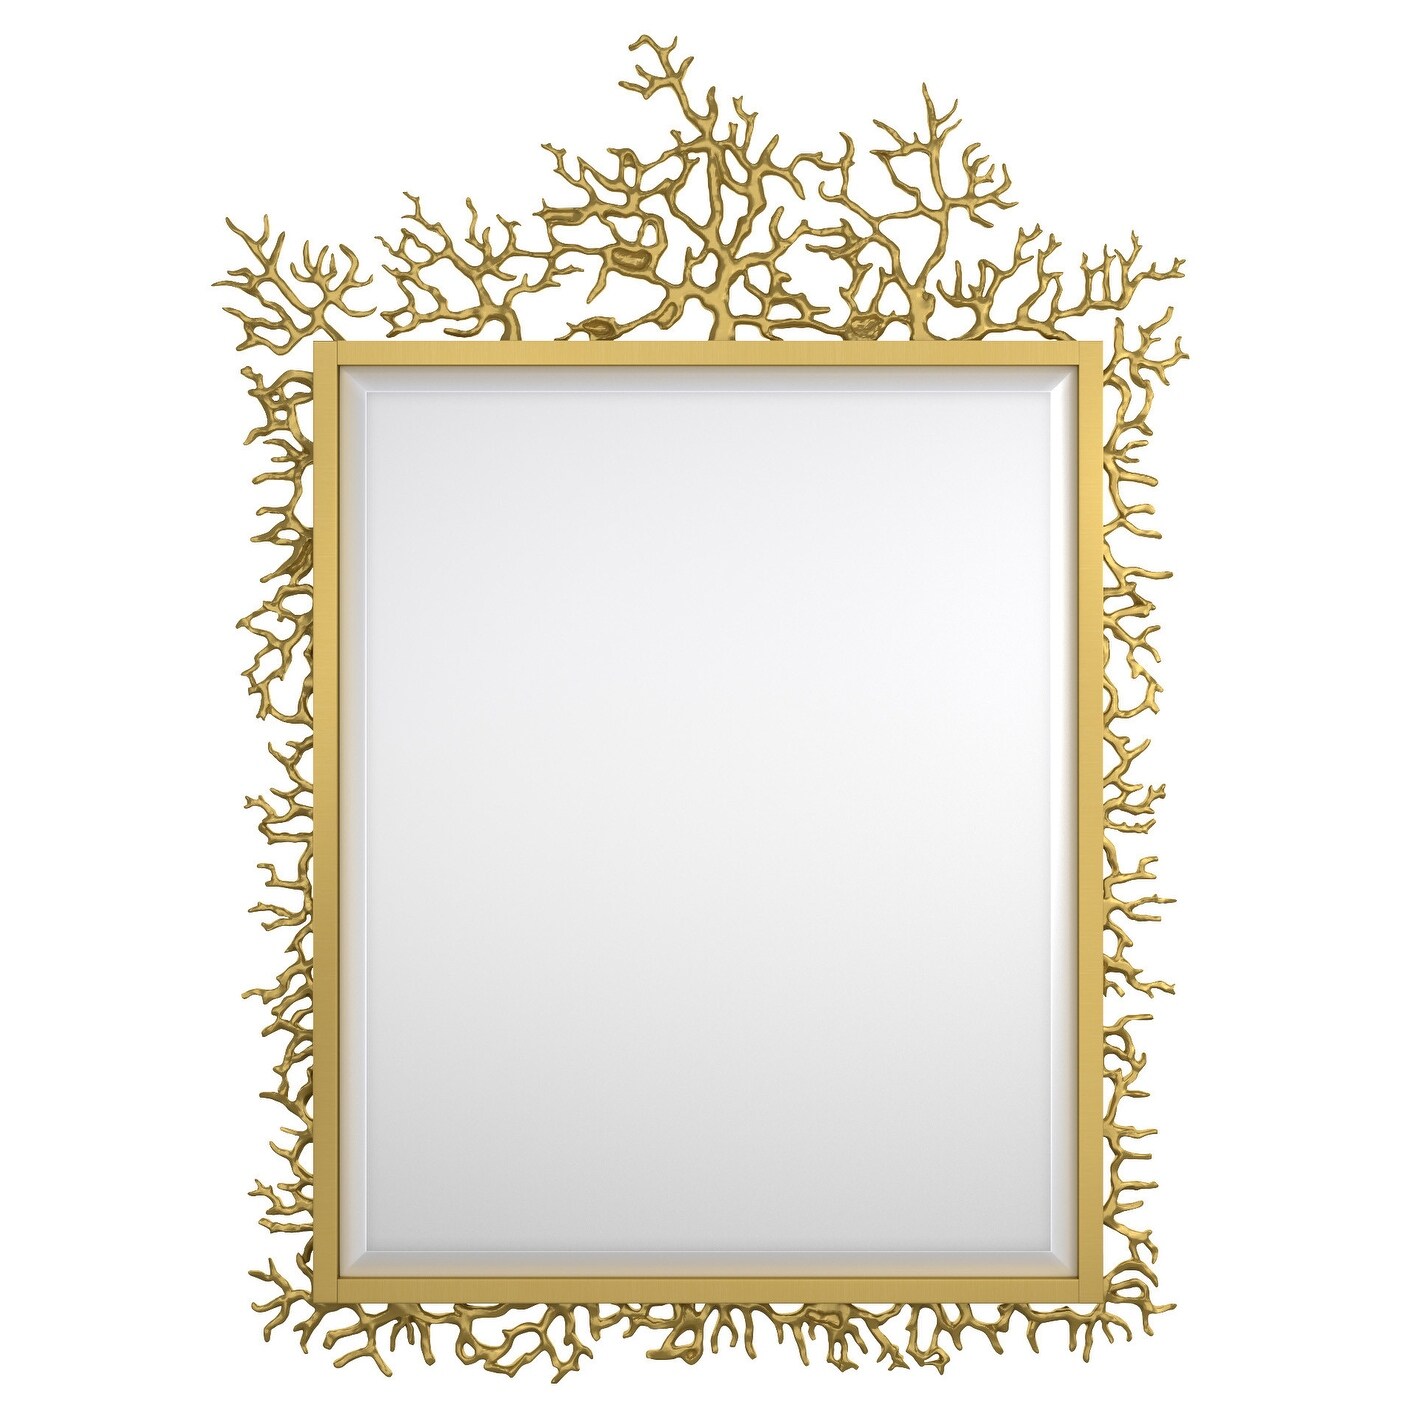 1586-90003-1 Twiggy Accent Mirror from the Cynthia Rowley - Gold - Dreamart Gallery